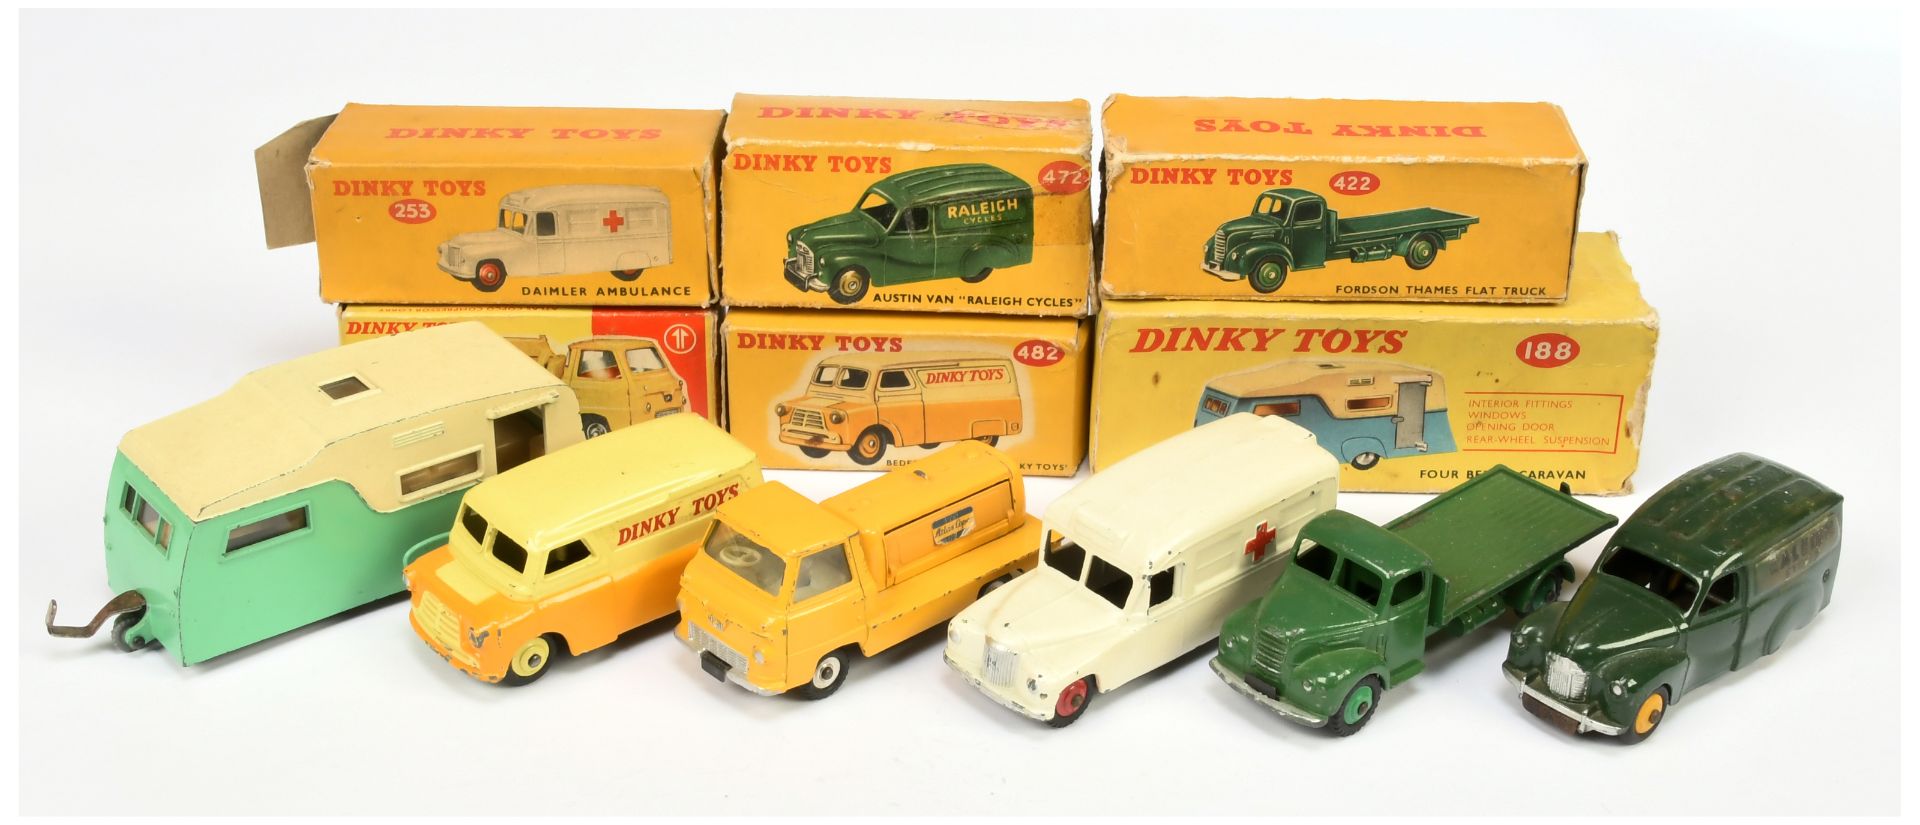 Dinky Toys Group Of To Include - 482 Bedford "Dinky Toys" Delivery Van, 253 Daimler "Ambulance",,...